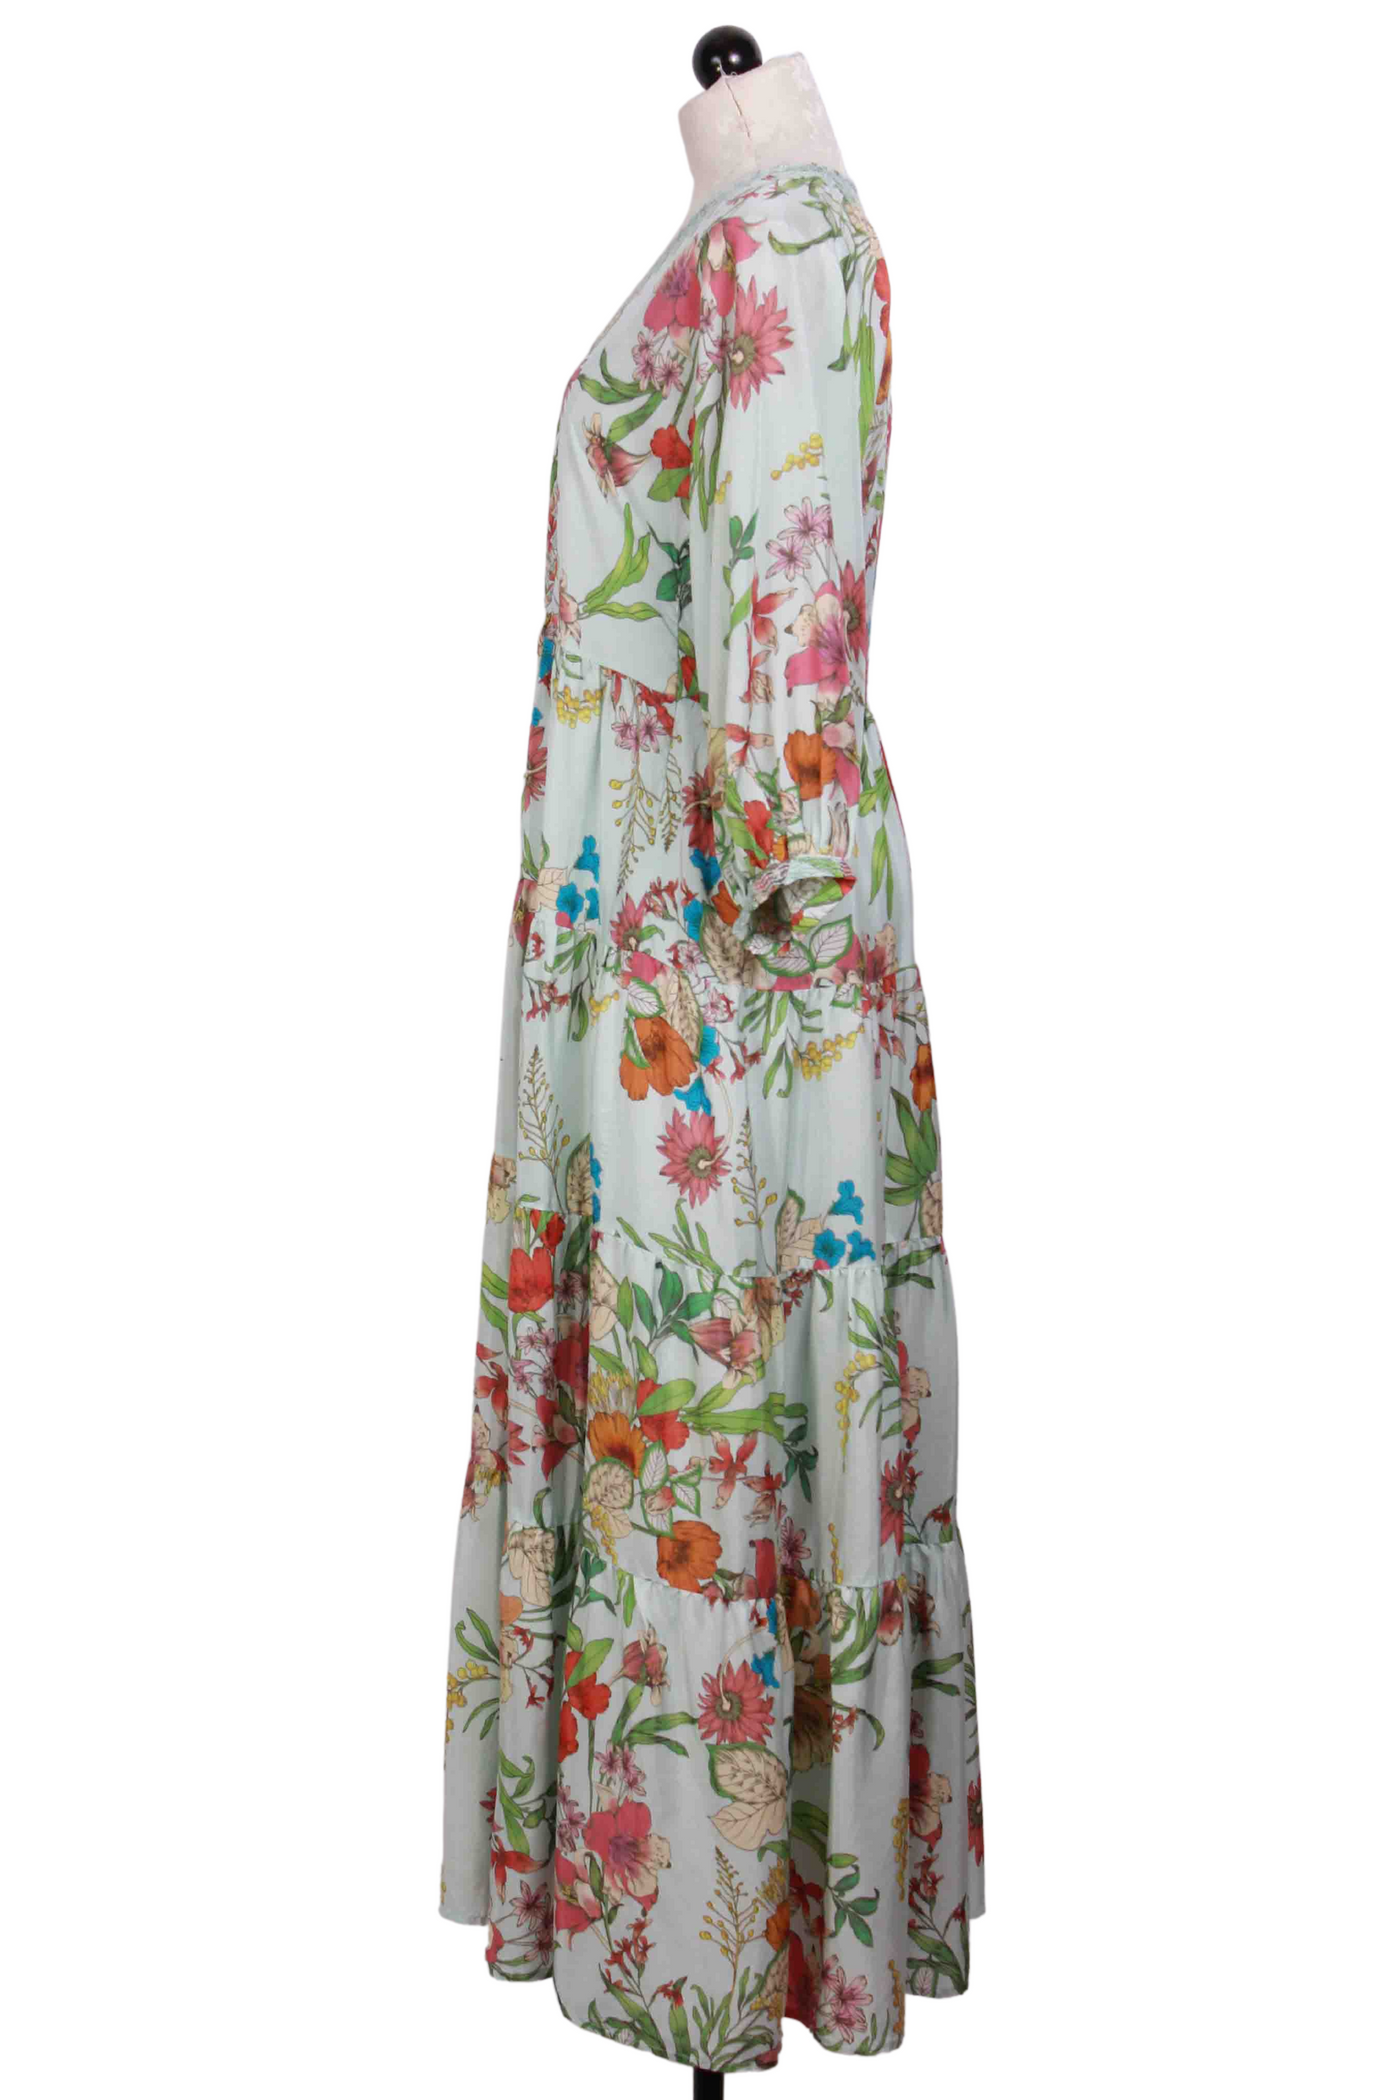 Side view of Floral Liliana Dolman Tiered Dress by Johnny Was